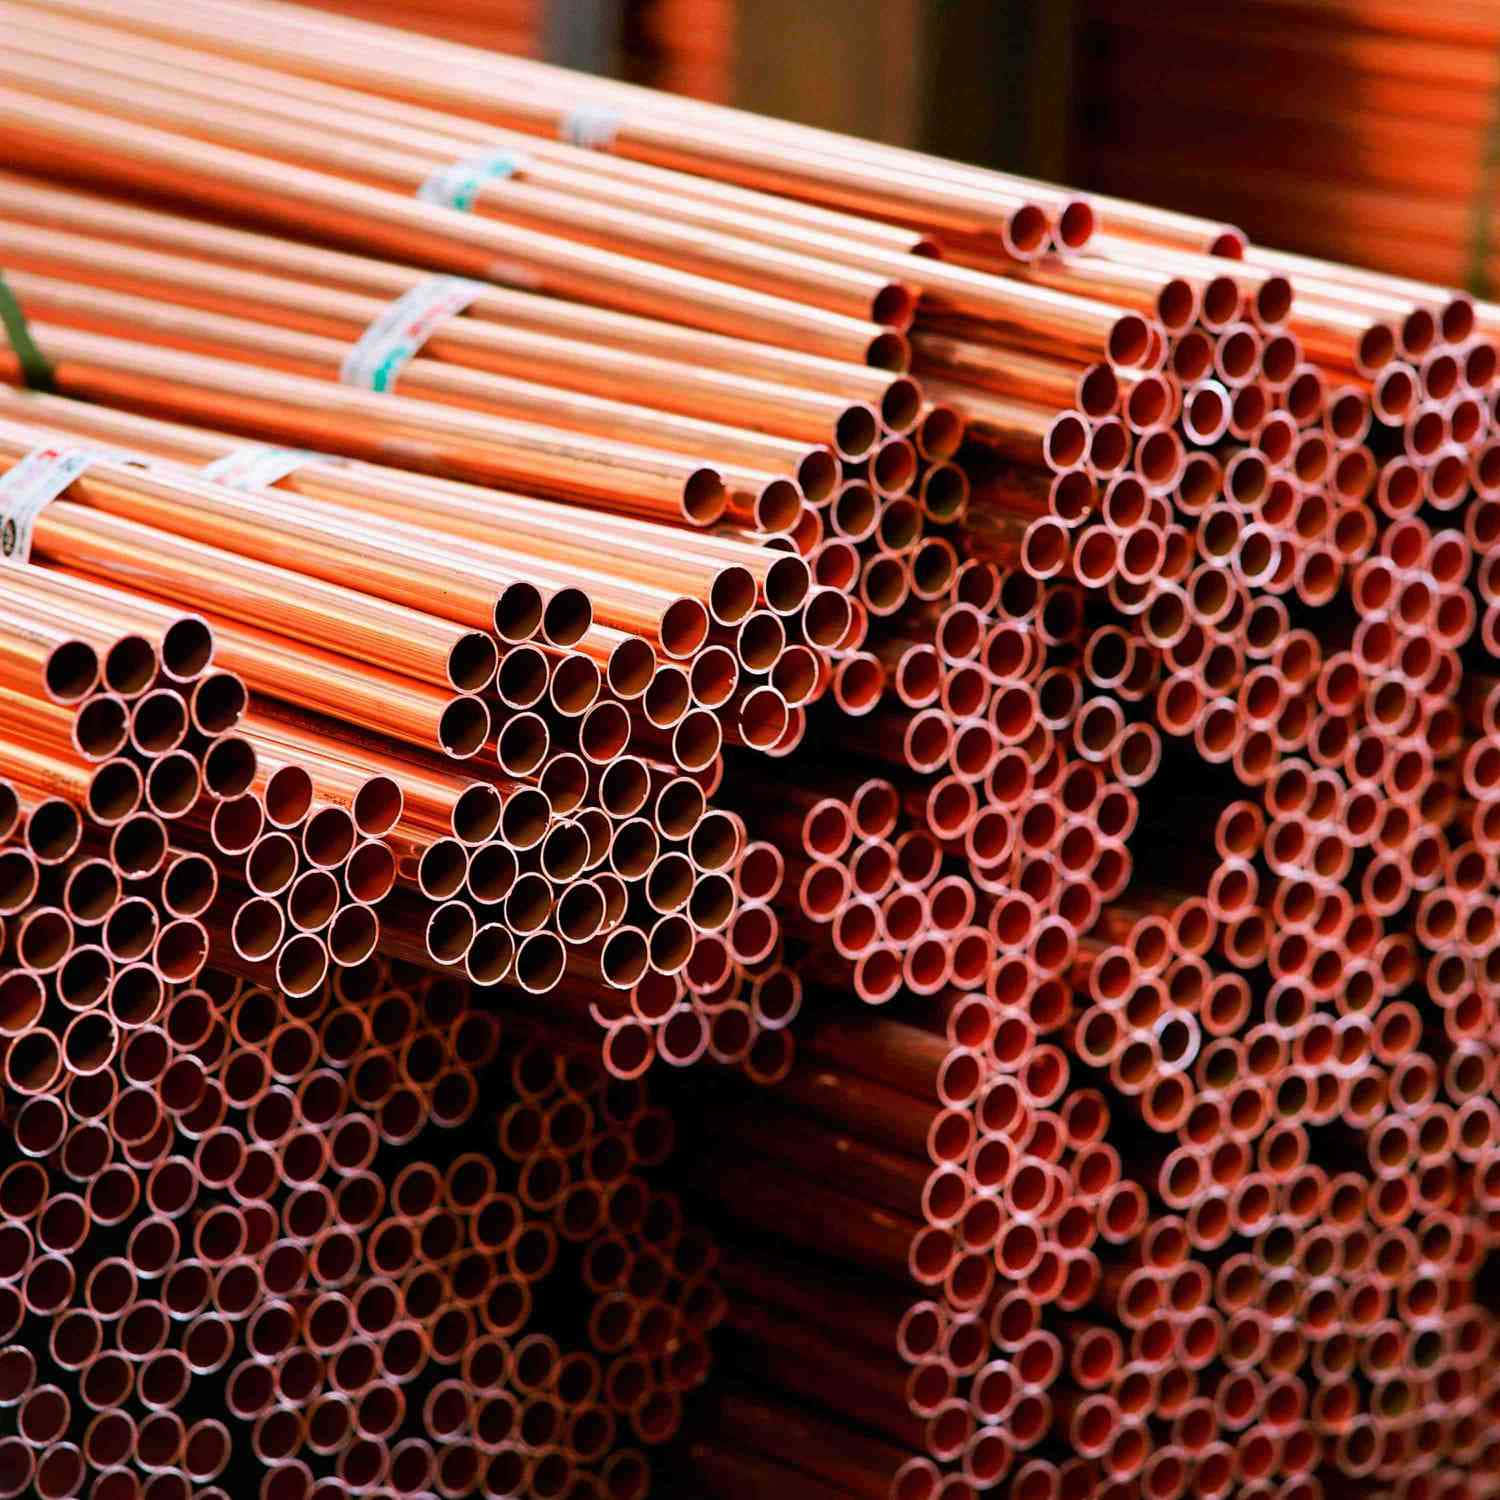 Copper Pipes Stockpile Background